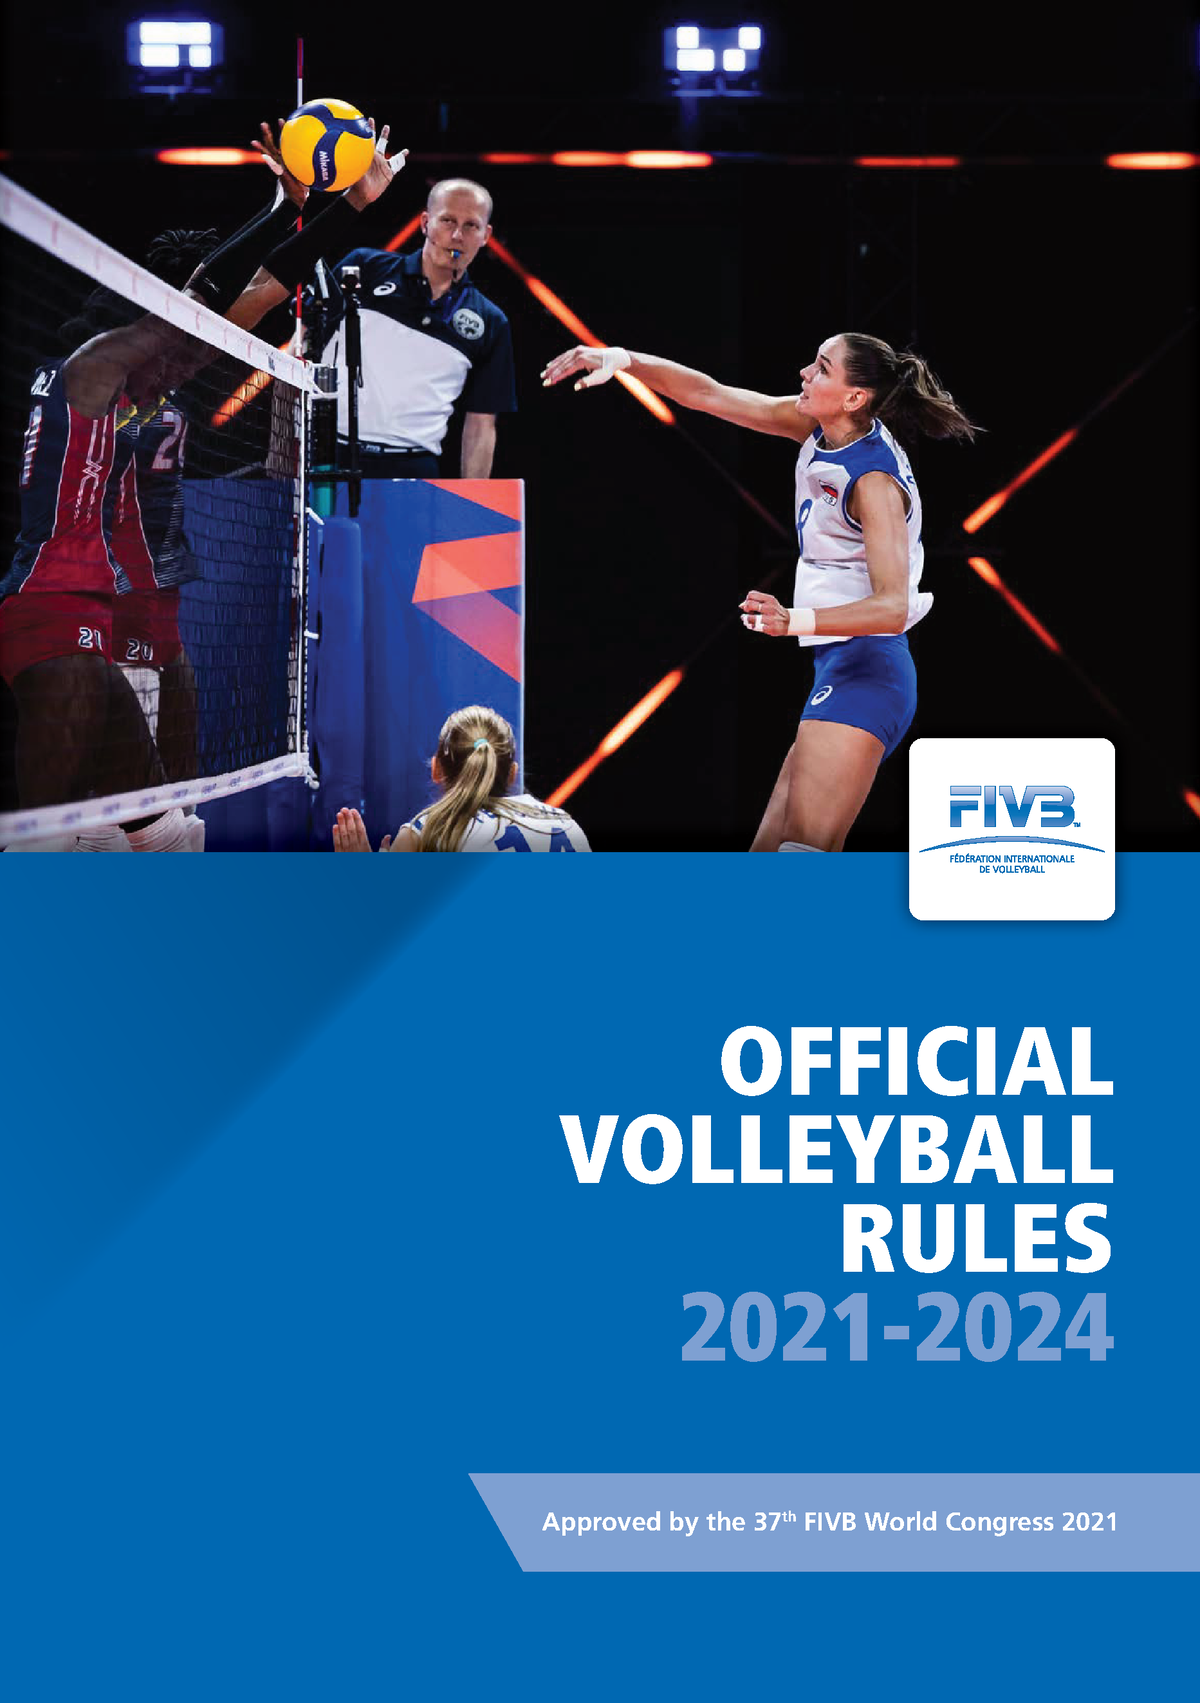 FIVBVolleyball Rules 2021 2024EN OFFICIAL VOLLEYBALL RULES 2021